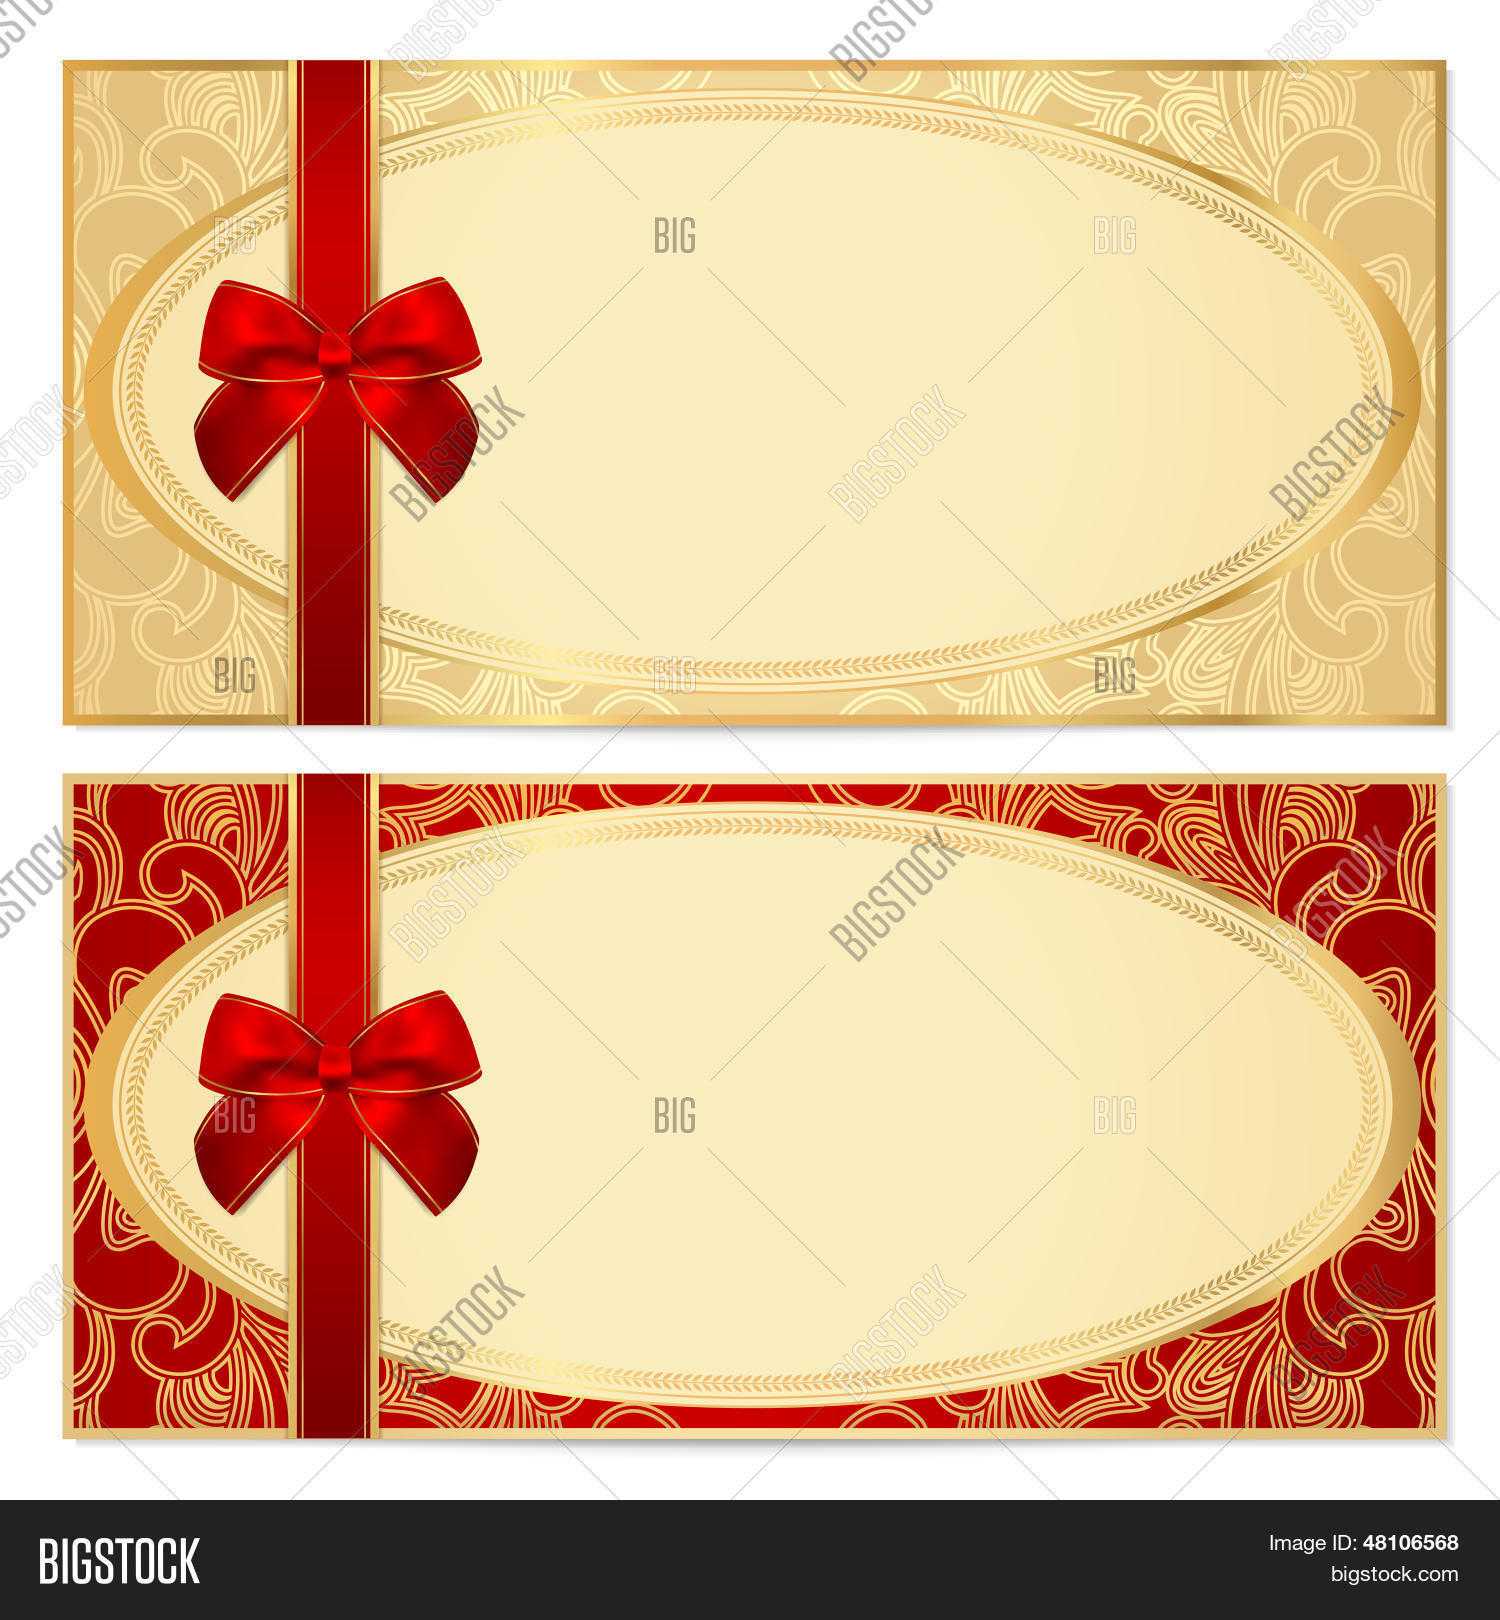 Voucher/ Gift Vector & Photo (Free Trial) | Bigstock Intended For Scroll Certificate Templates